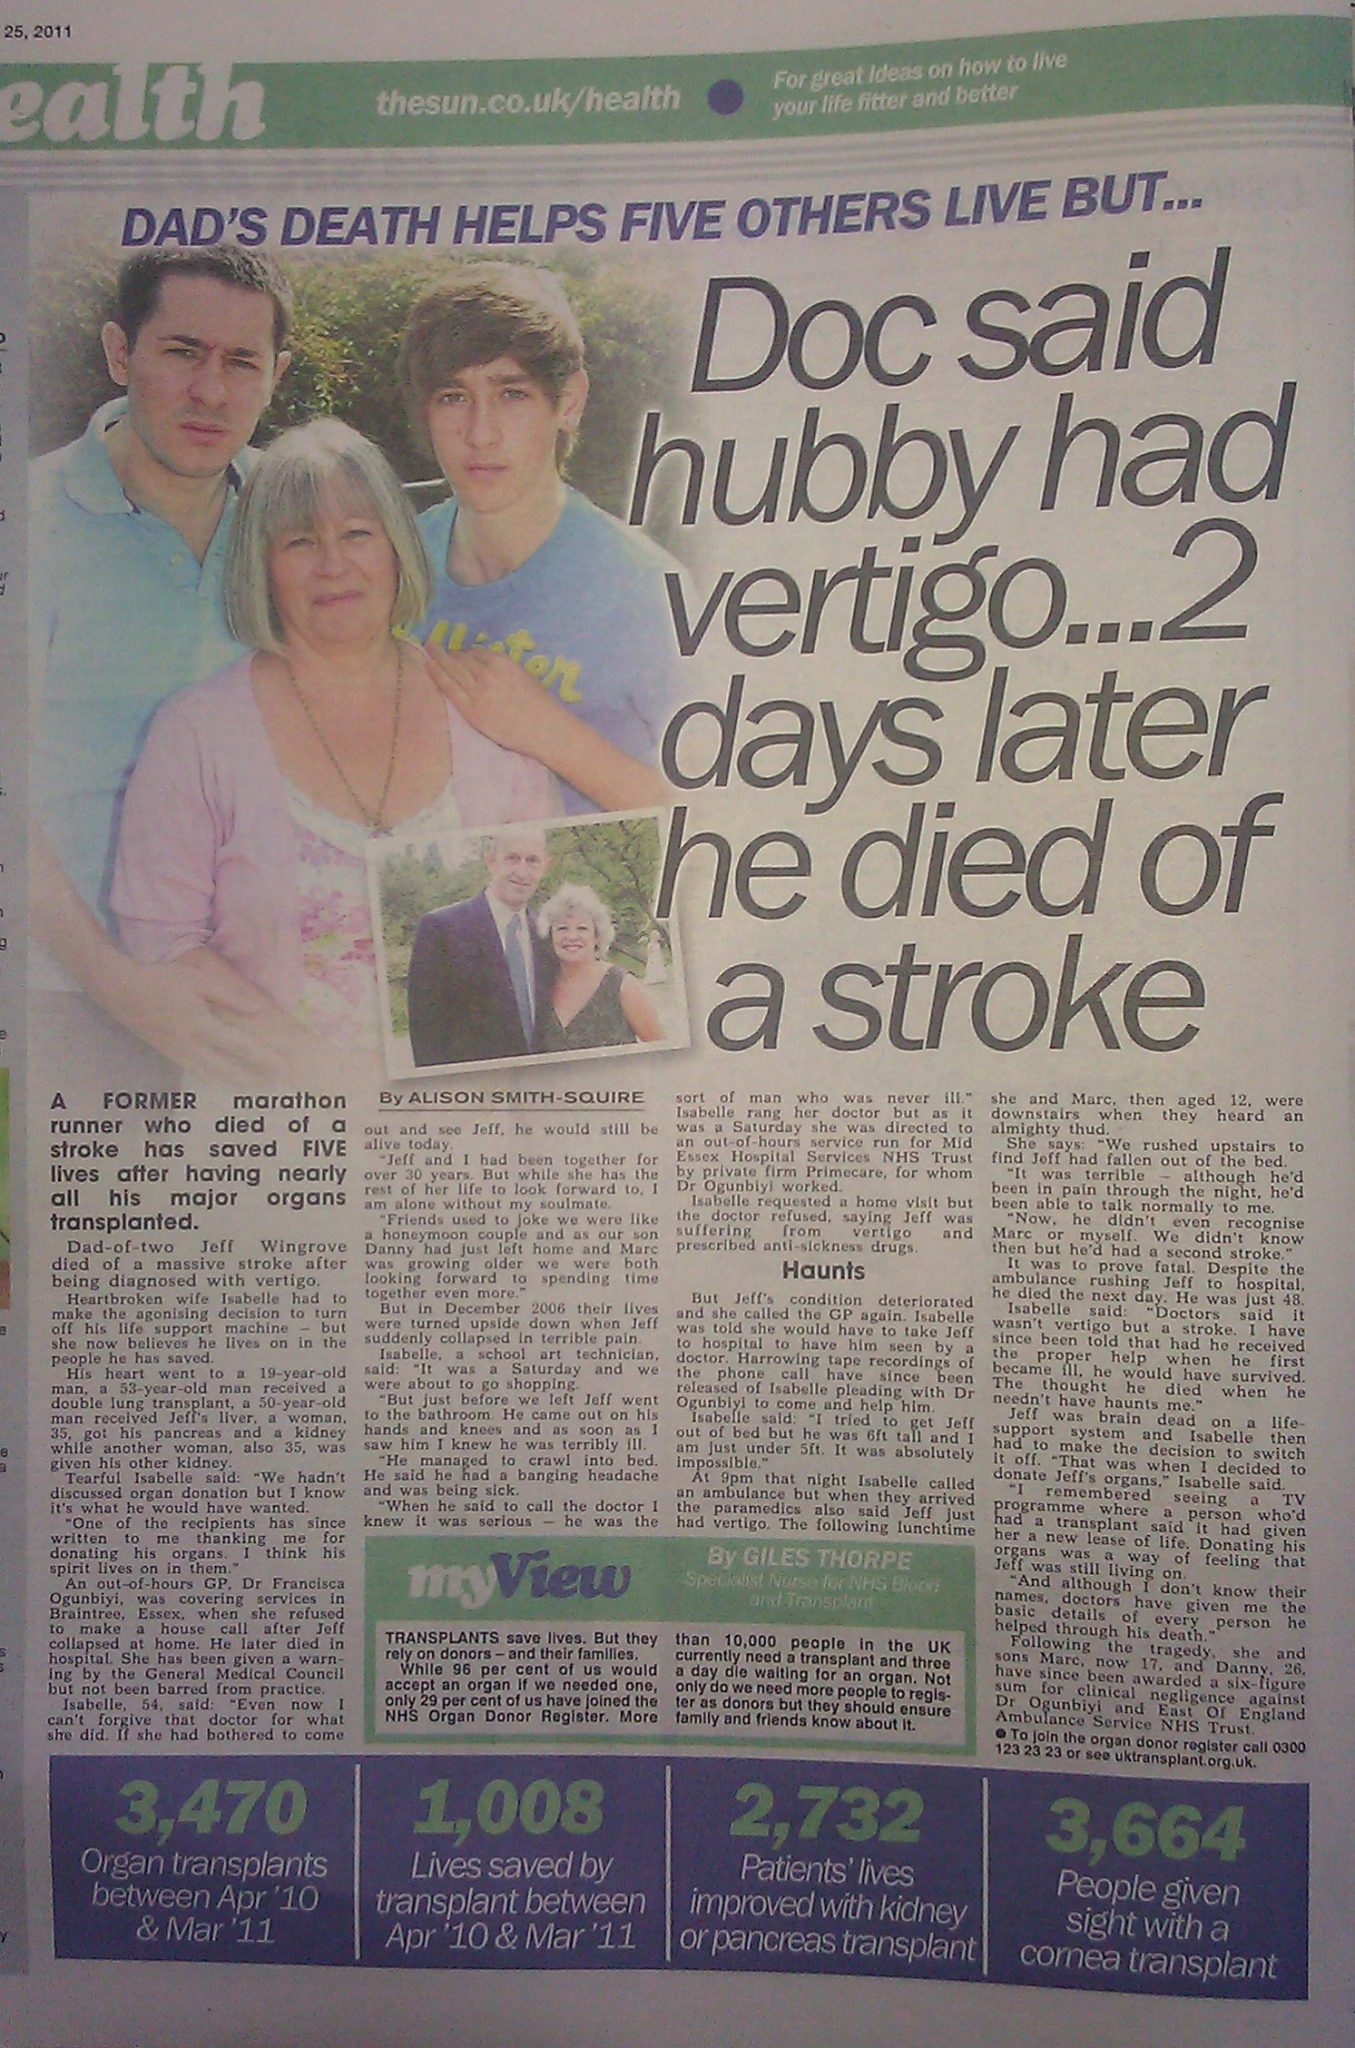 GP misdiagnosed my husband and he died ...